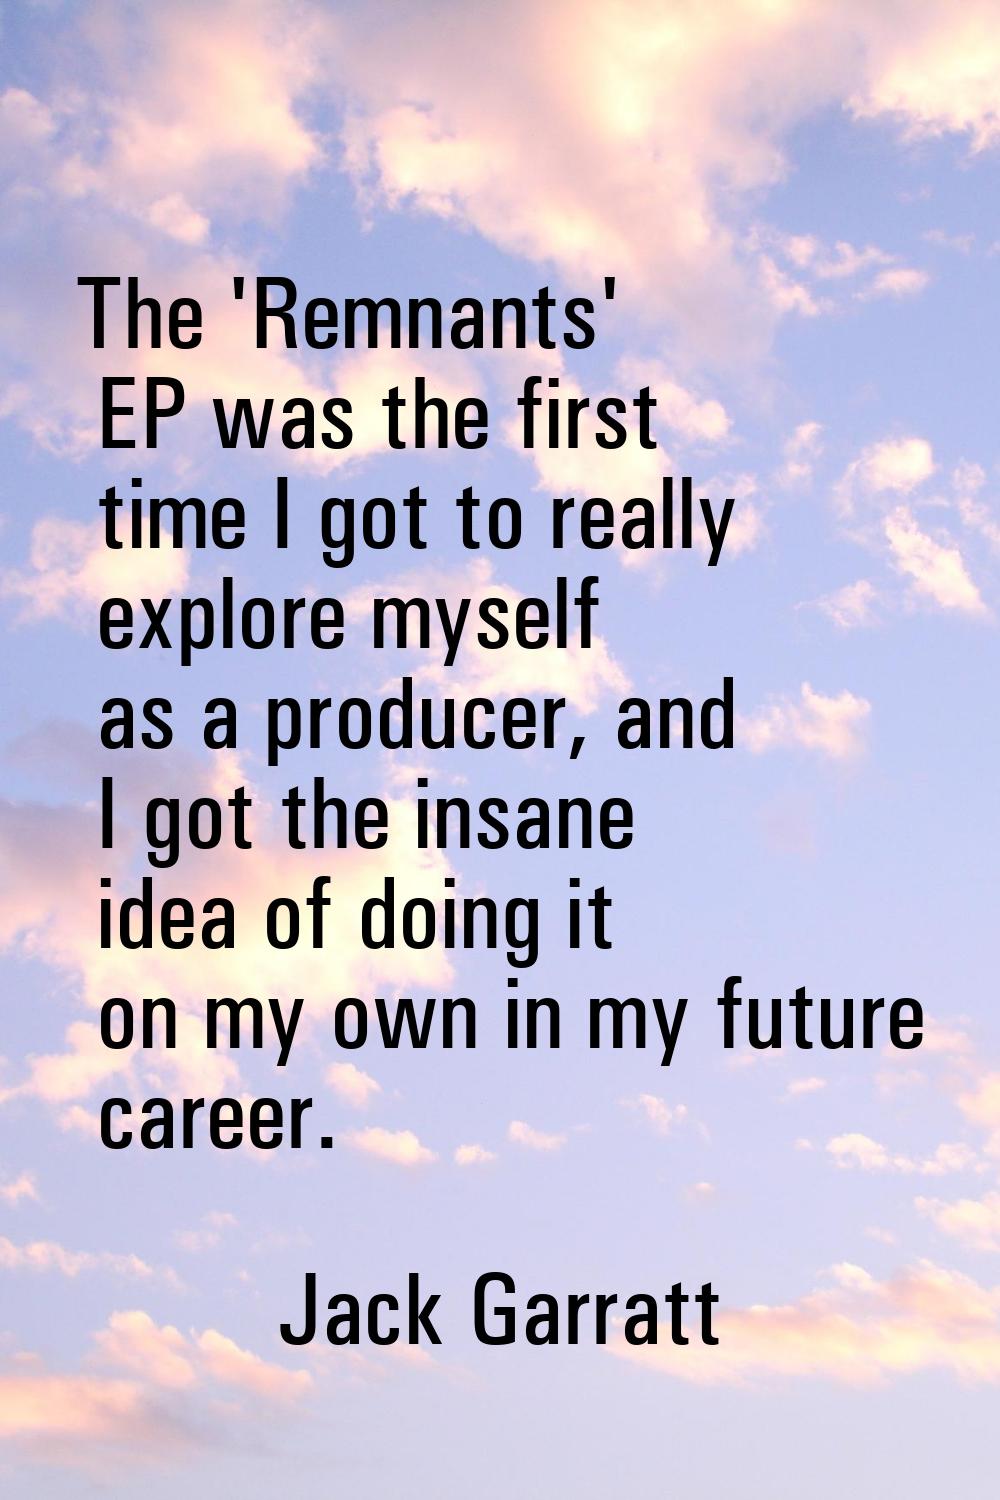 The 'Remnants' EP was the first time I got to really explore myself as a producer, and I got the in